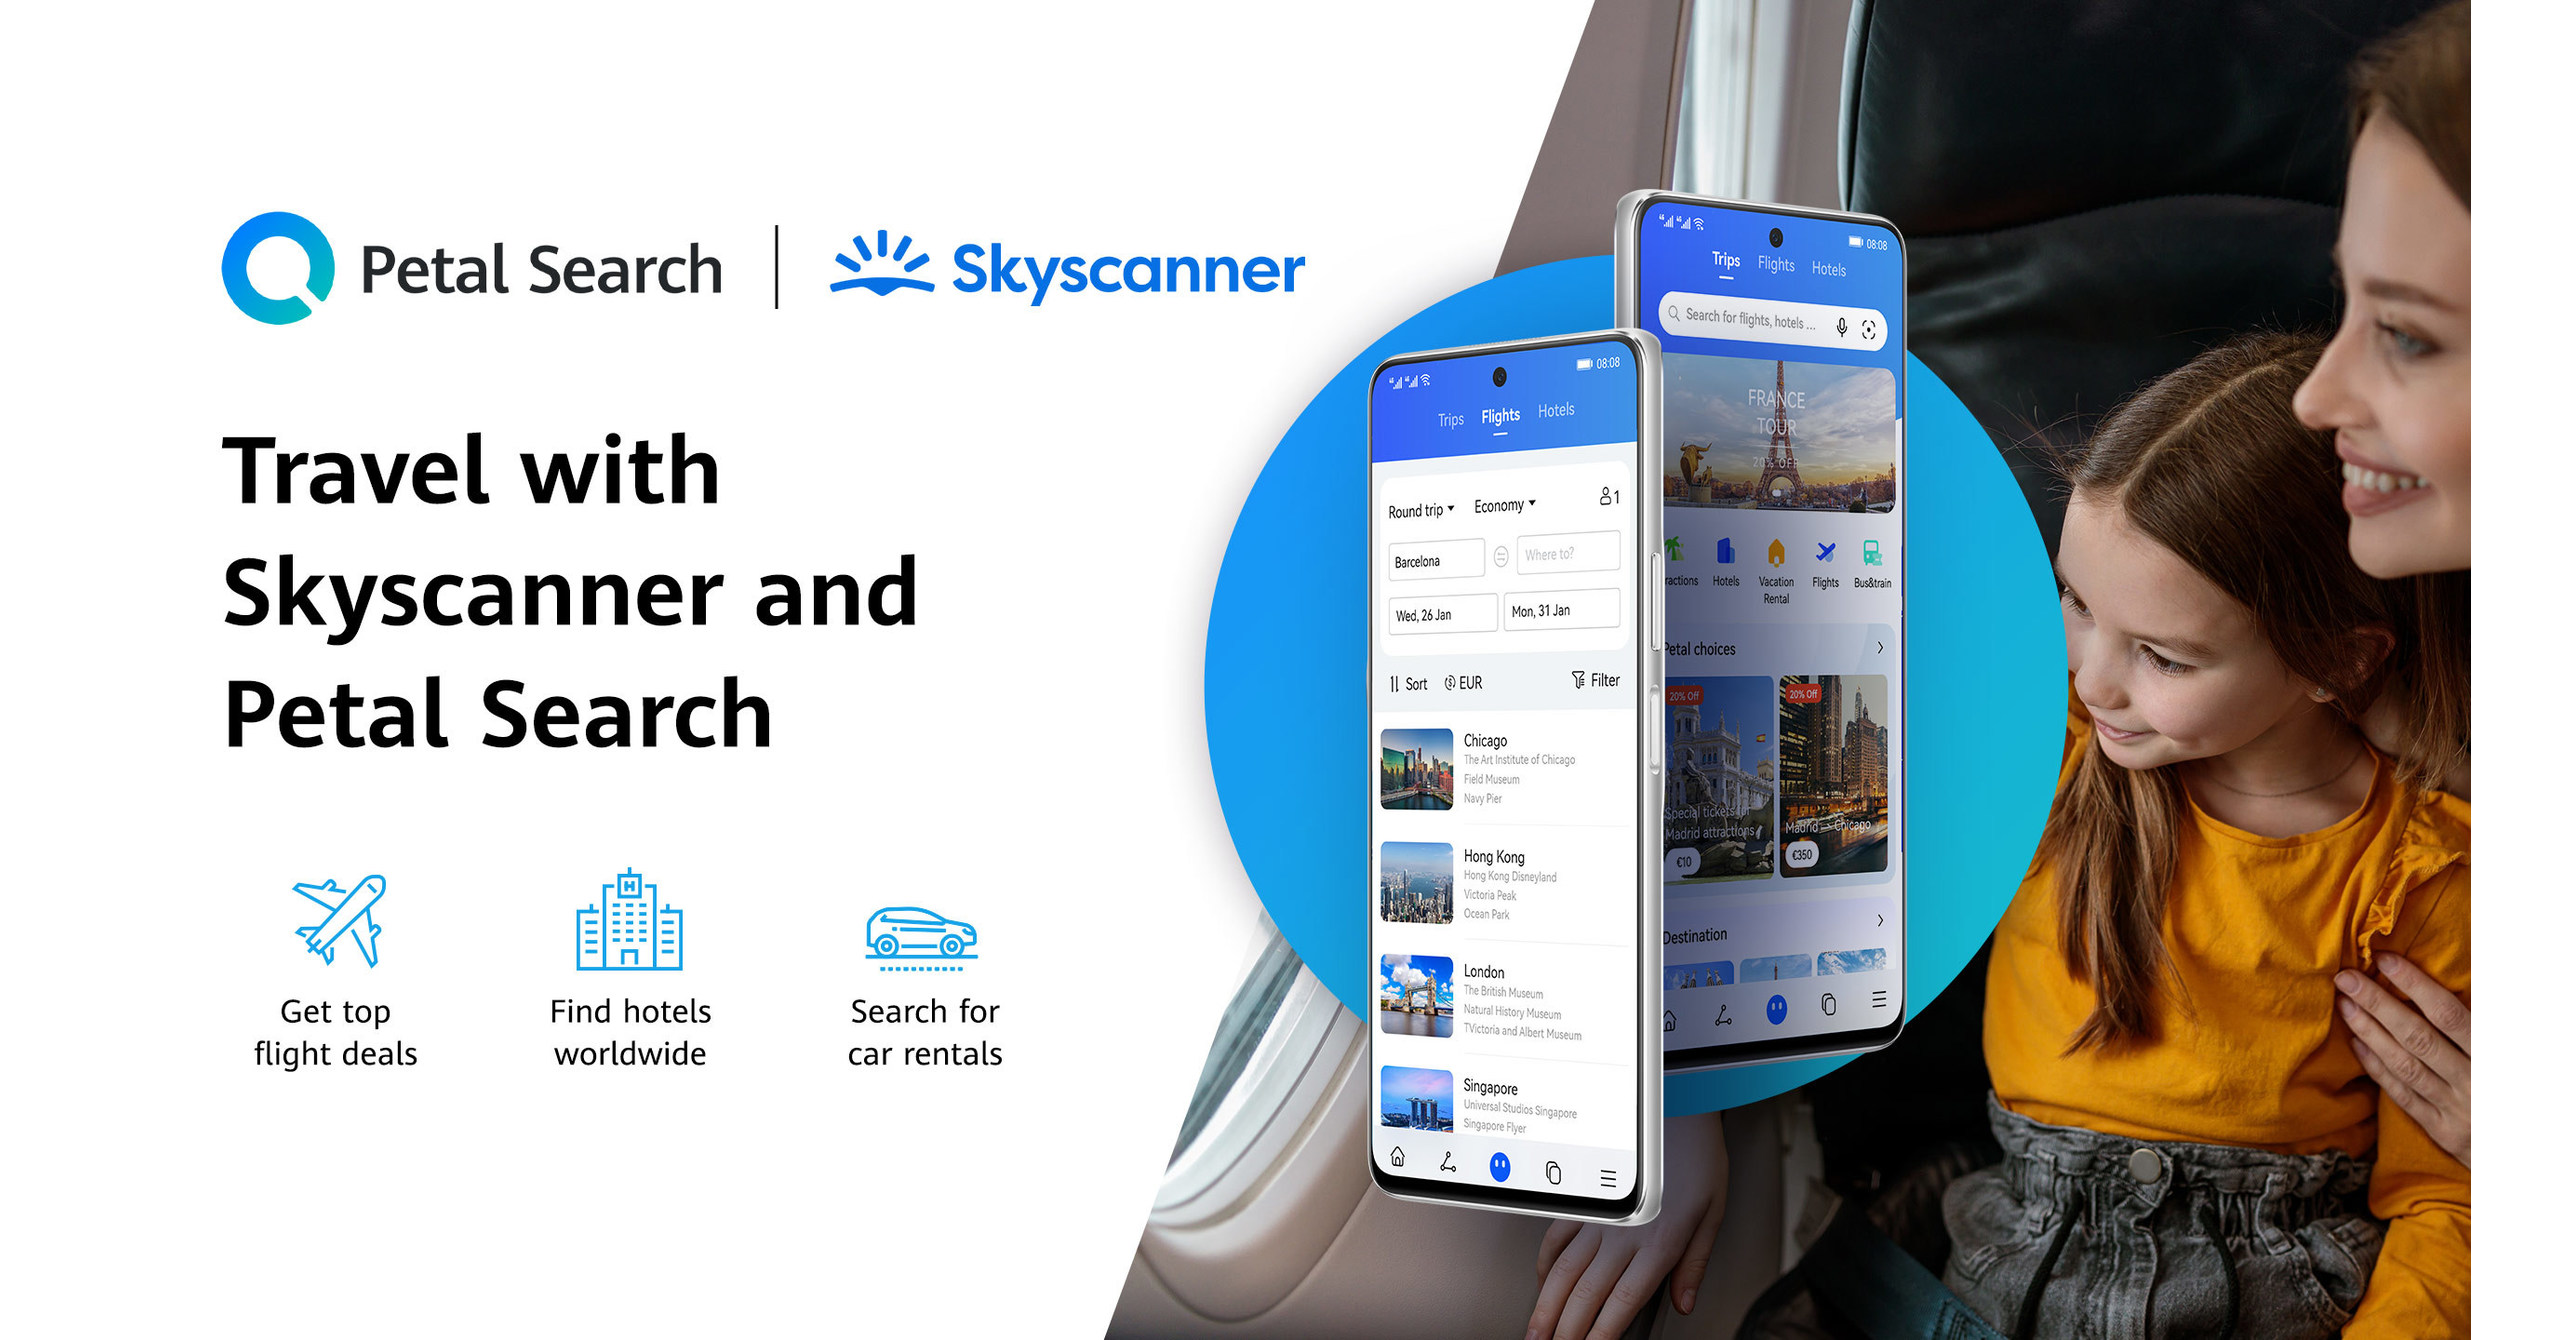 Huawei and Skyscanner form flights partnership to bring even more choice to consumers on Petal Search